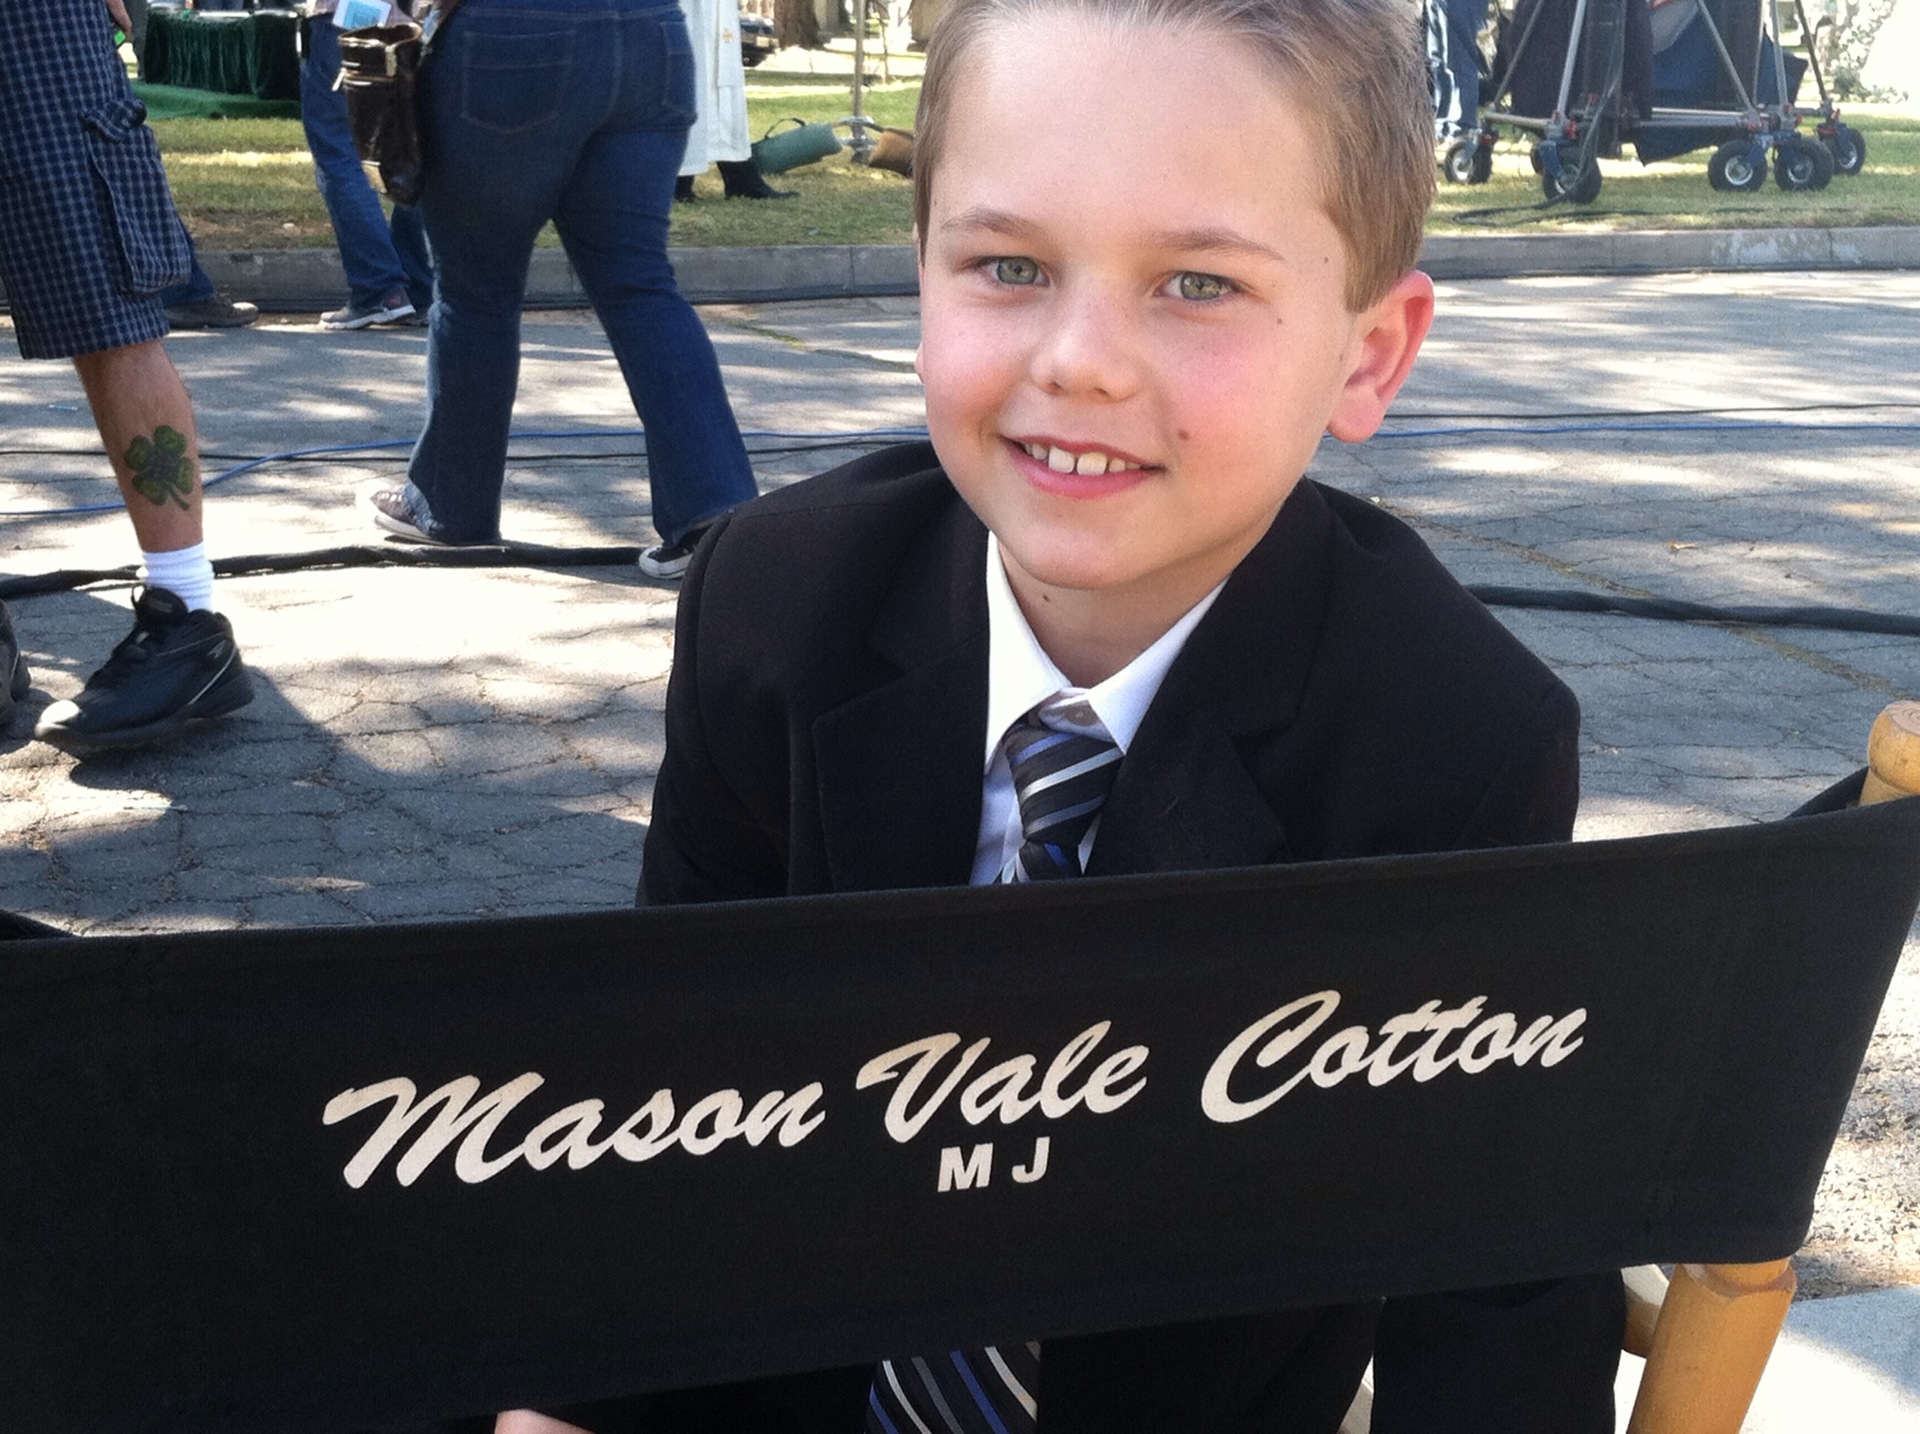 On The Set Of Desperate Housewives 2012 with Mason Vale Cotton